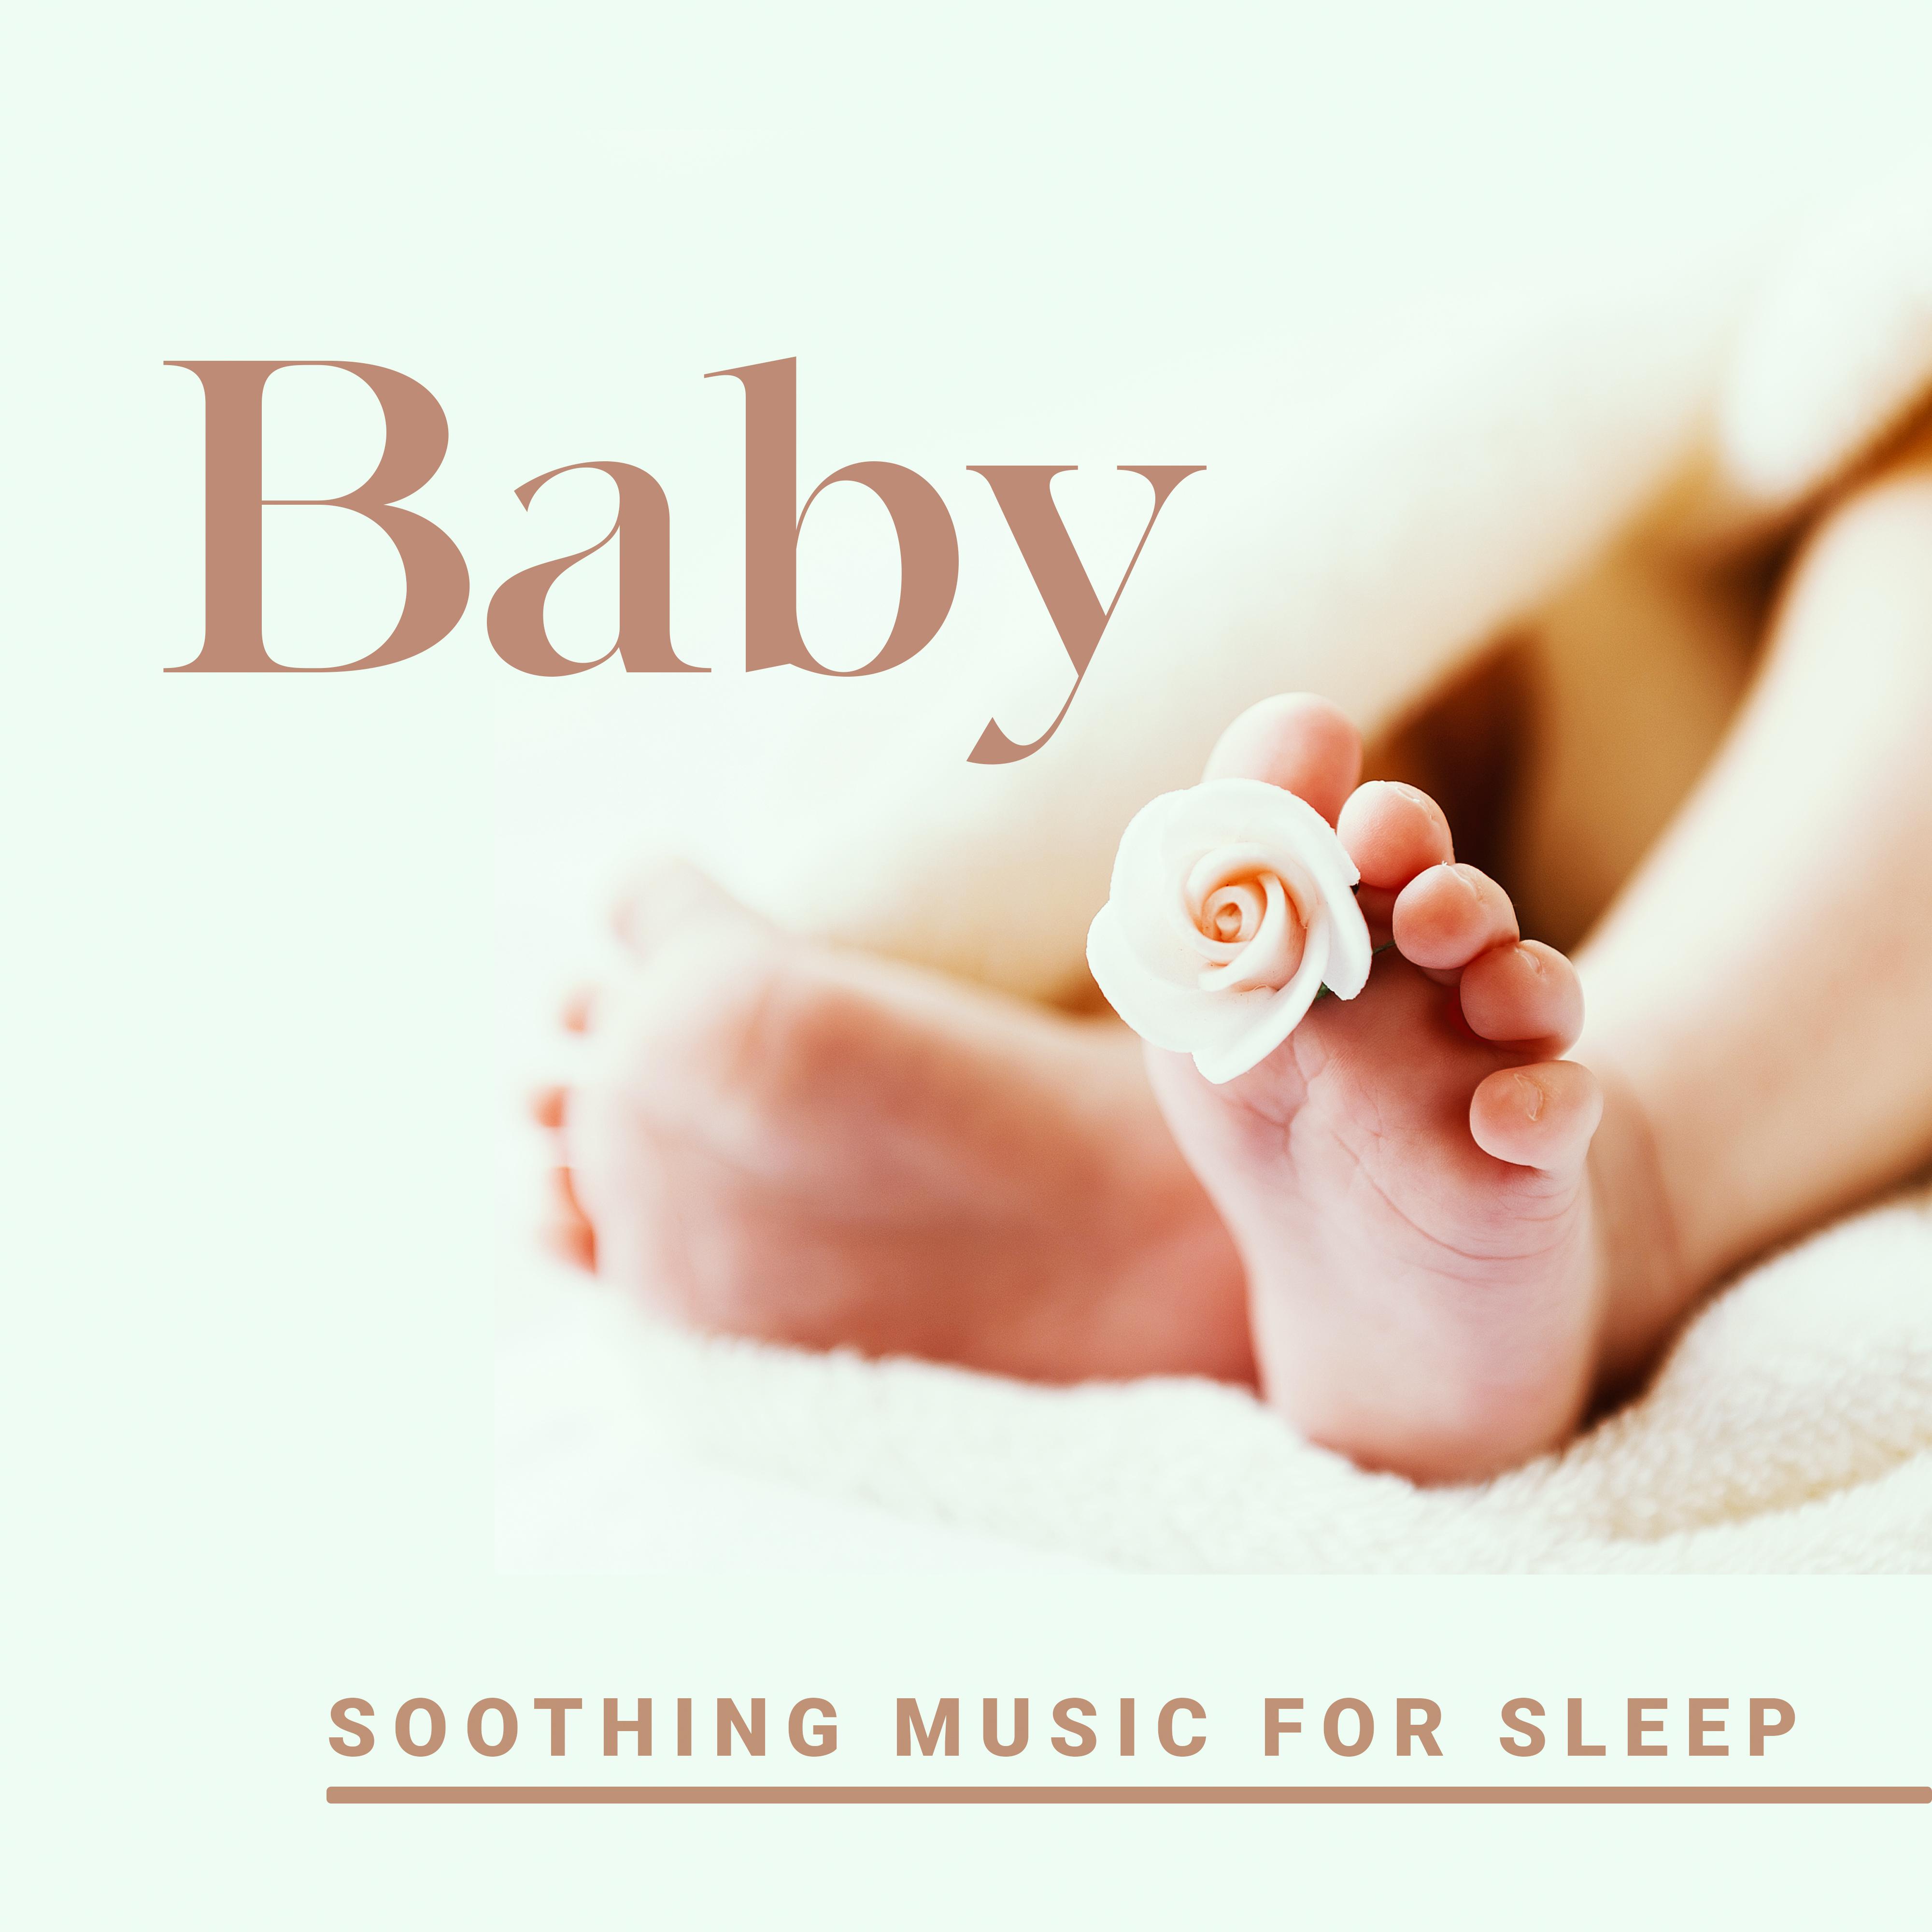 Baby Soothing Music for Sleep